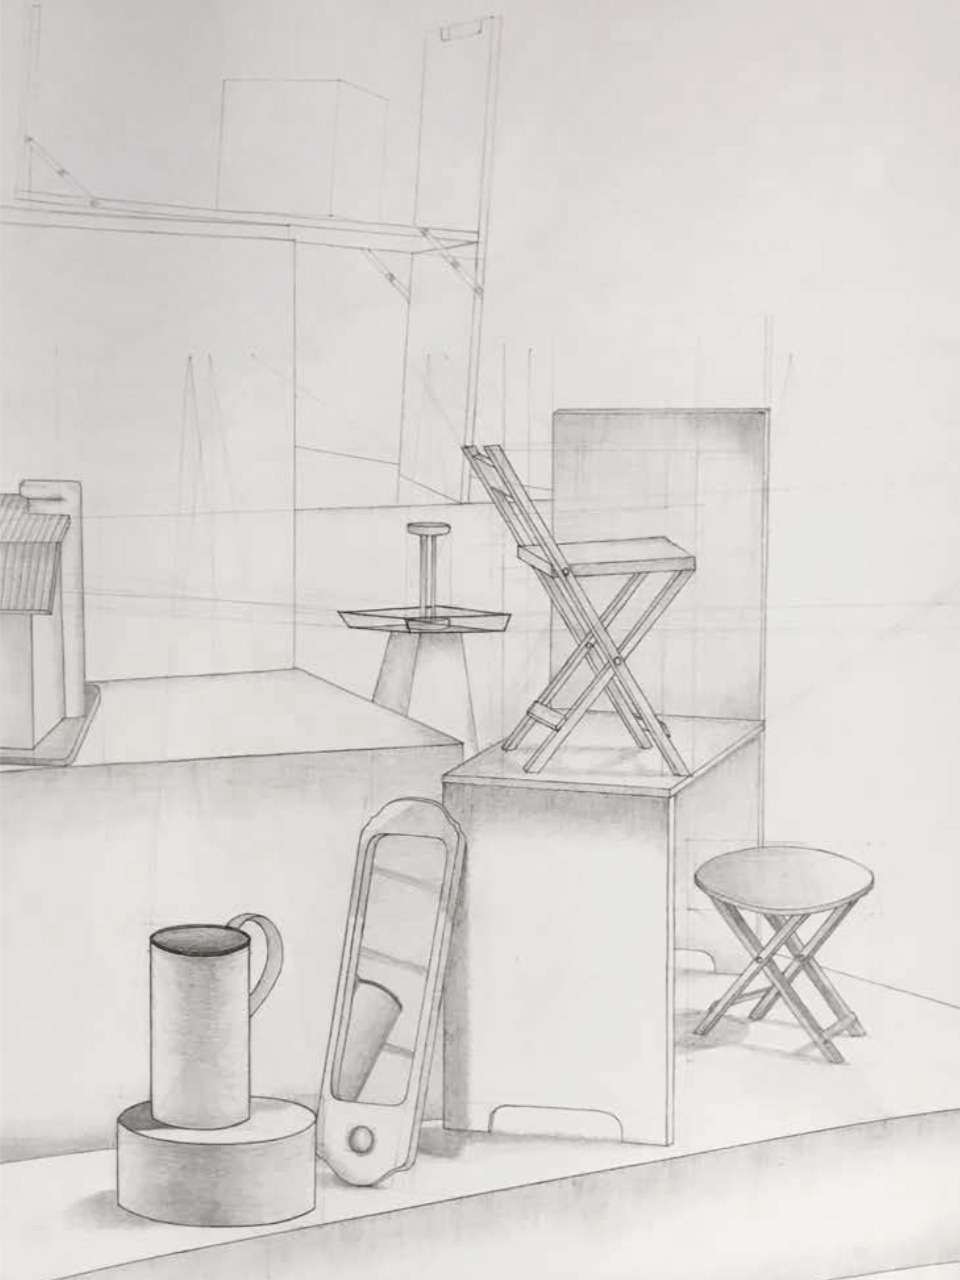  Student: Sophie Astro Project: “Still Life in Perspective” (Drawing I) Graphite 18”x24” 